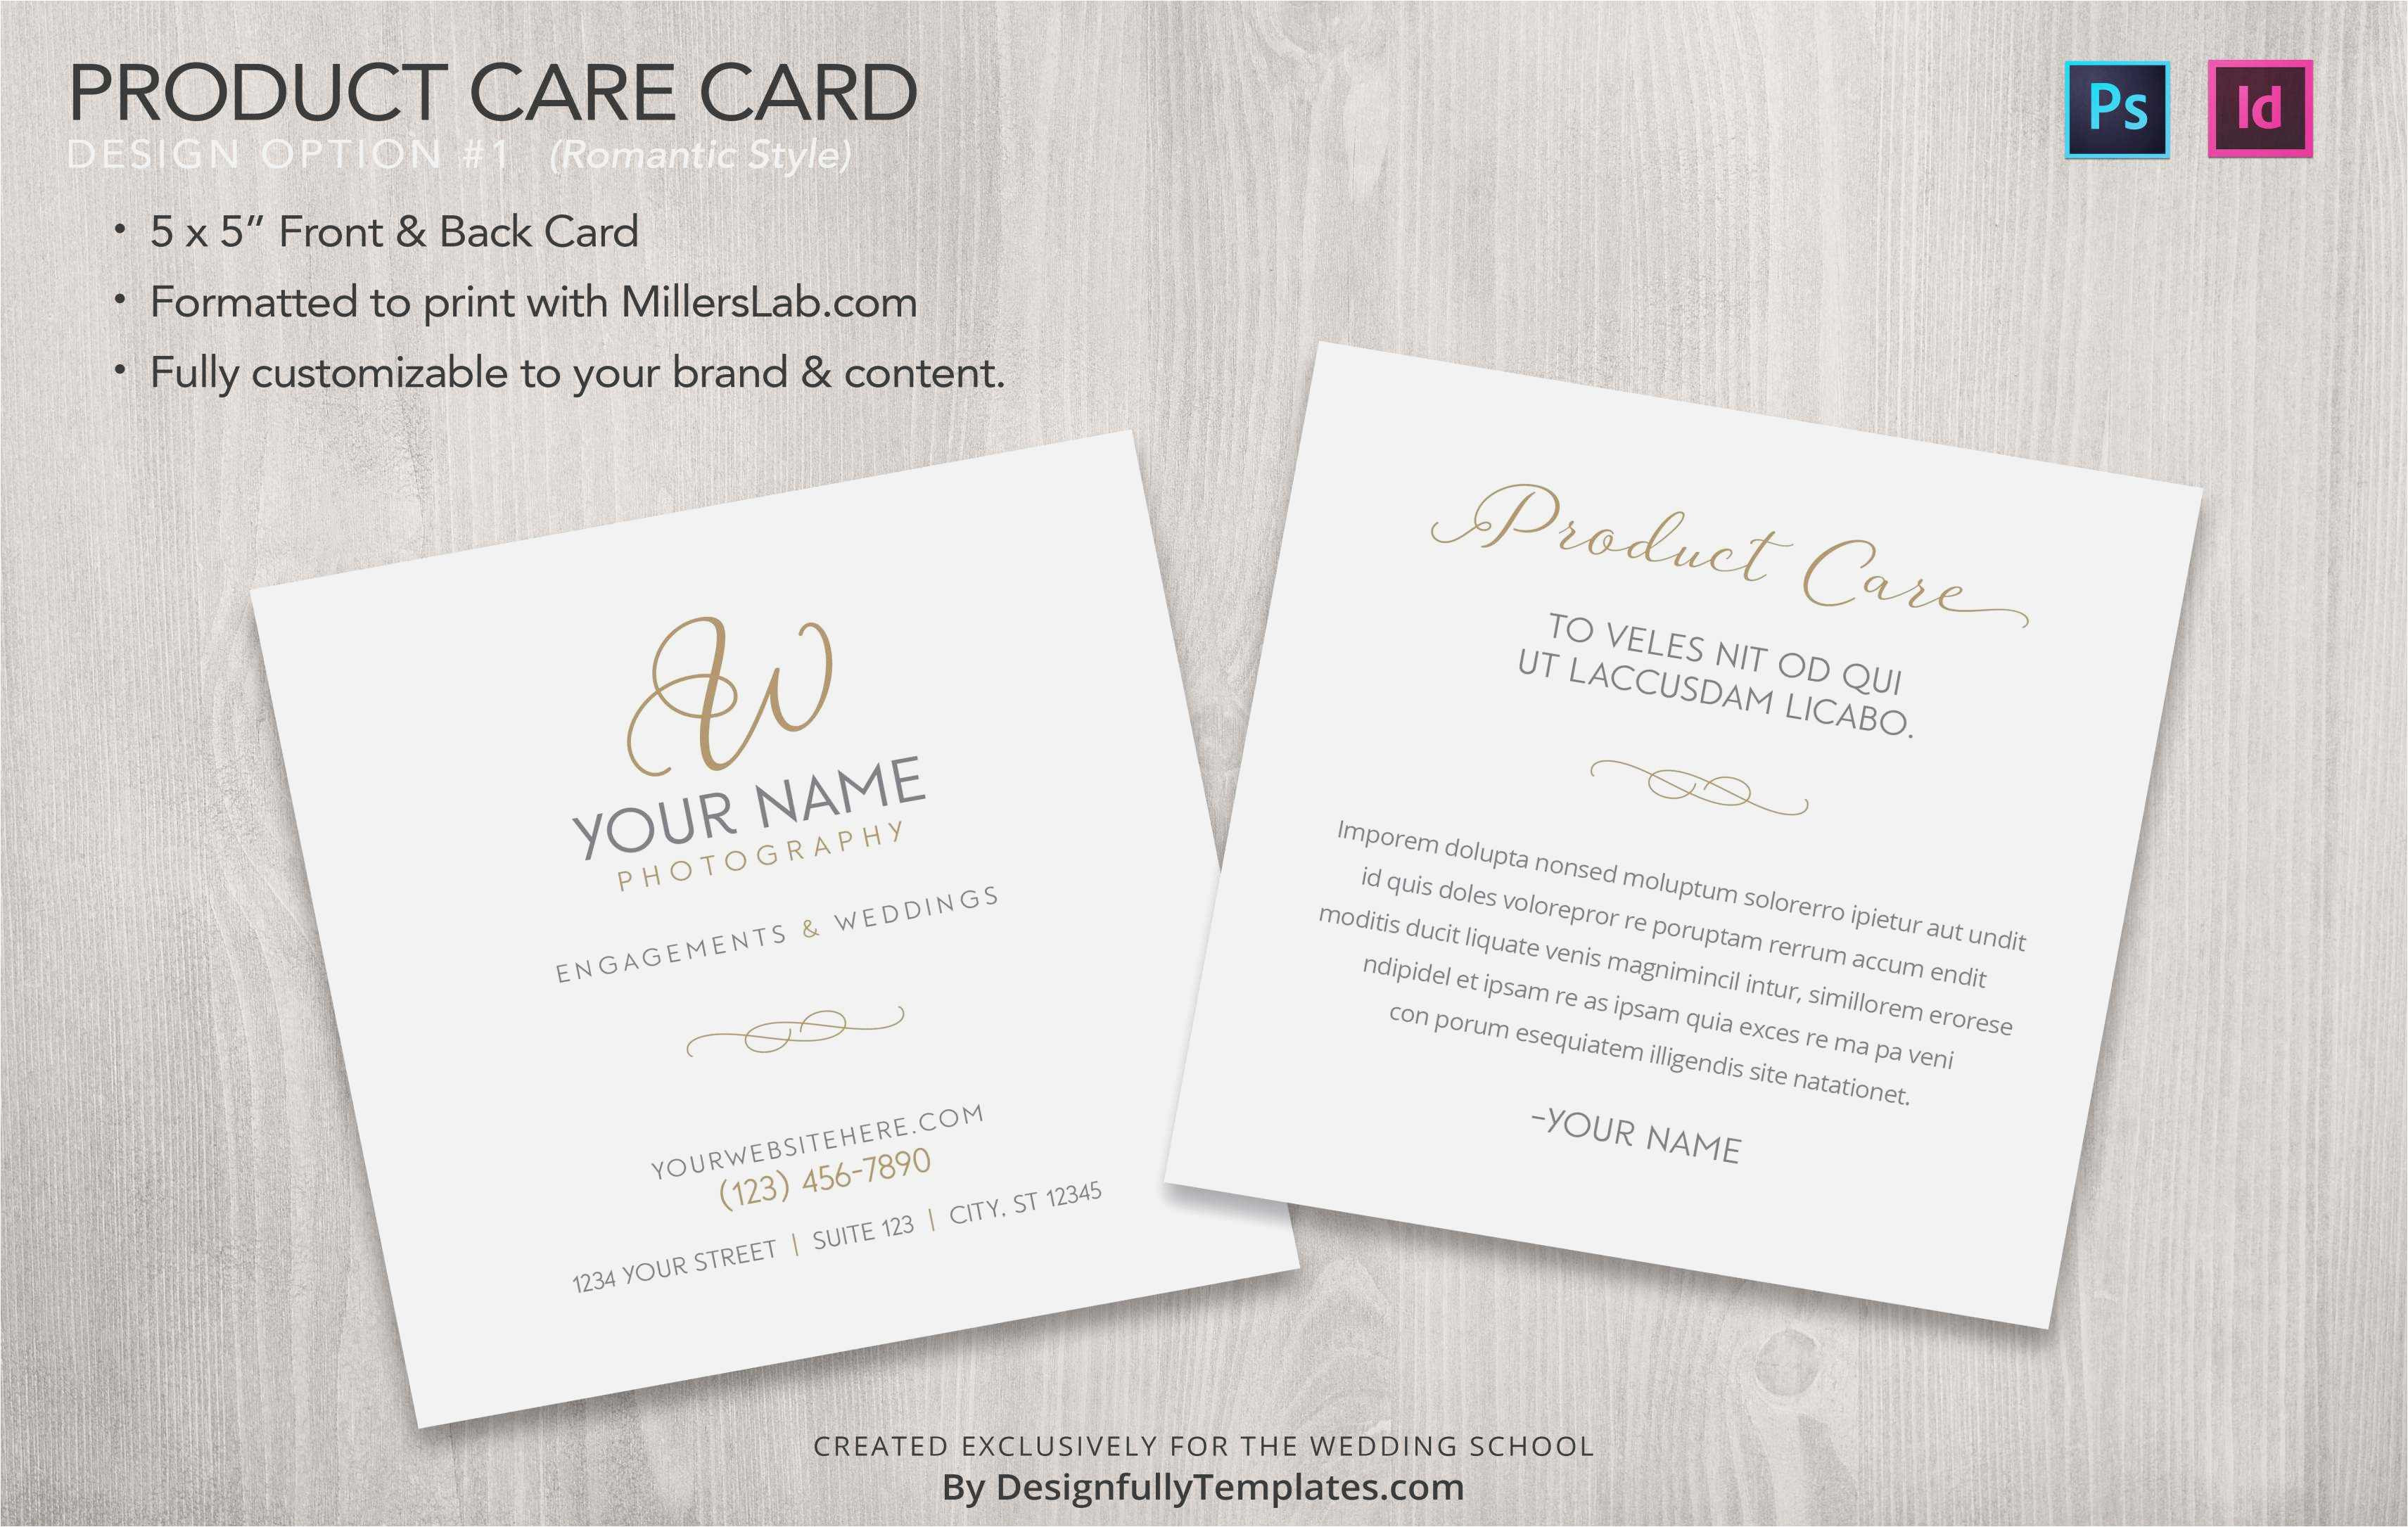 Download Free Business Cards Psd Templates Valid 20 Business Card Templates New